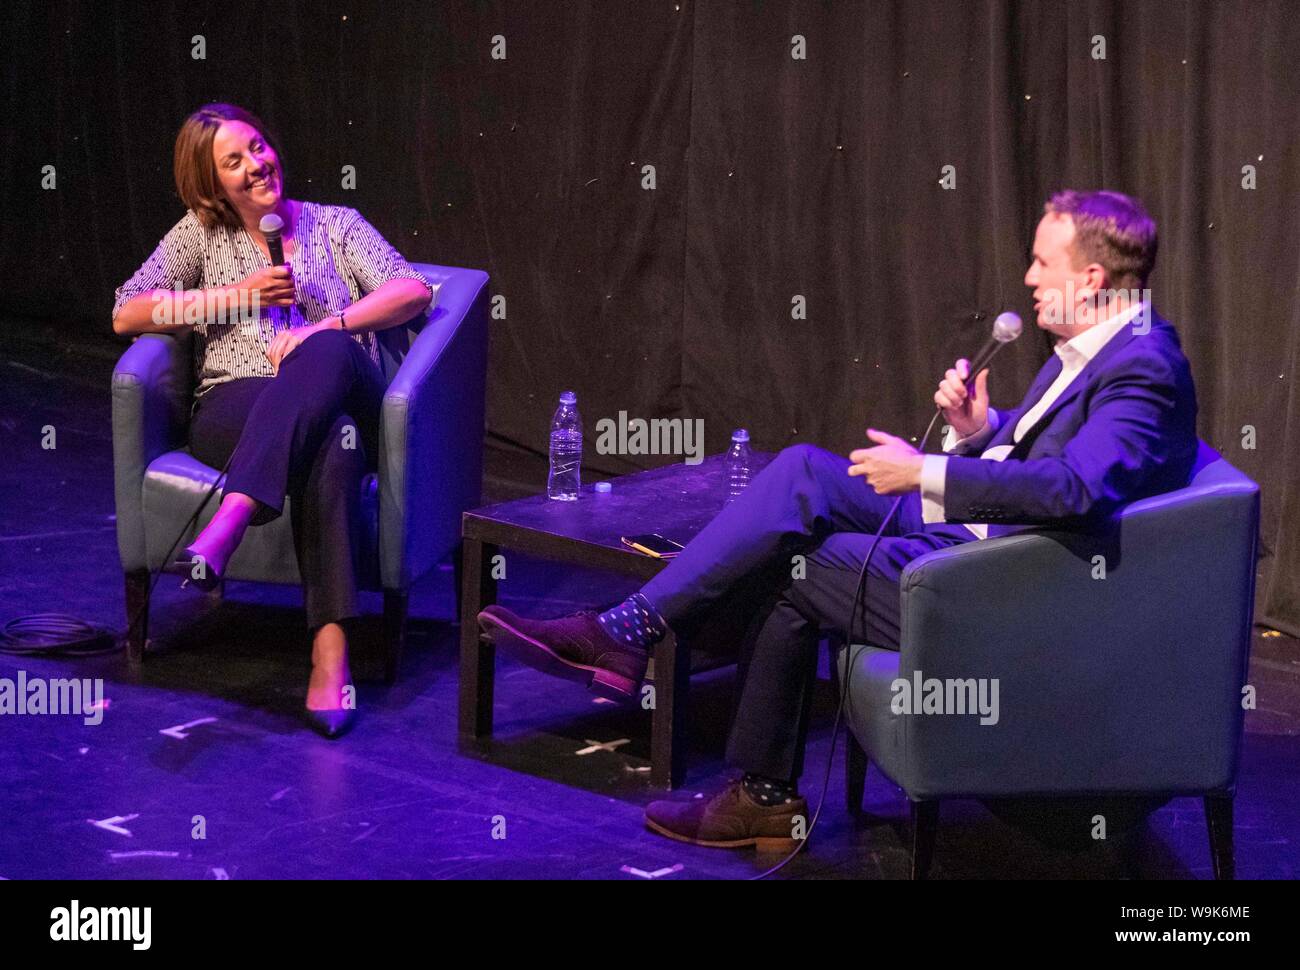 Edinburgh, UK. 14th Aug, 2019. Kezia Dugdale takes part in an interview with Matt Forde at the Edinburgh Fringe Festival. During the interview she confessed that she didn't think Jeremy Corbyn will become Prime Minister. Pictured: Kezia Dugdale and Matt Forde Credit: Rich Dyson/Alamy Live News Stock Photo